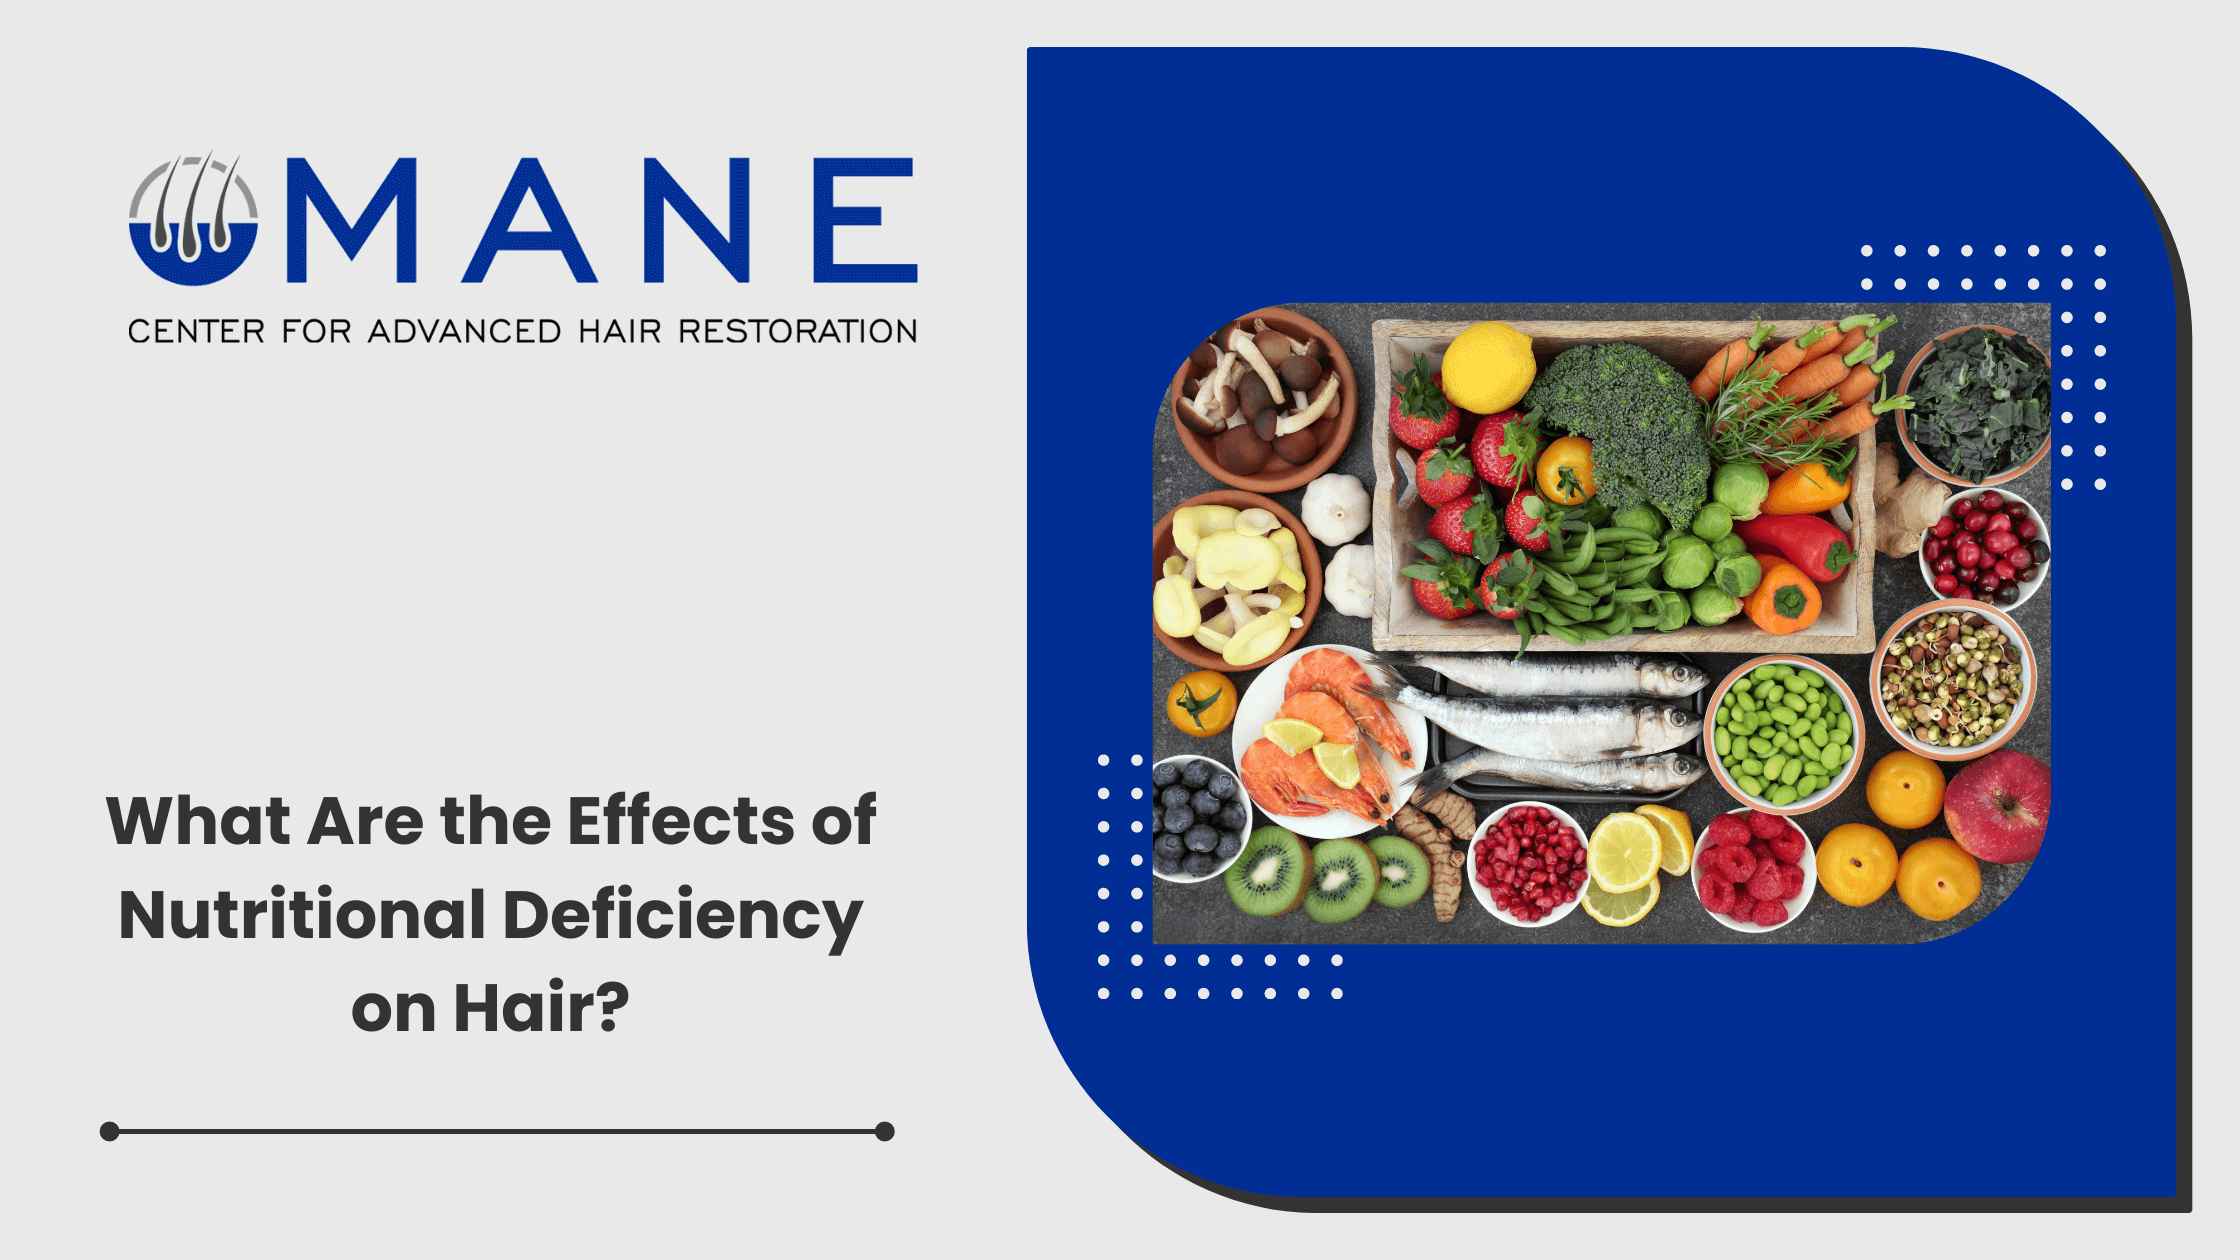 What Are the Effects of Nutritional Deficiency on Hair?